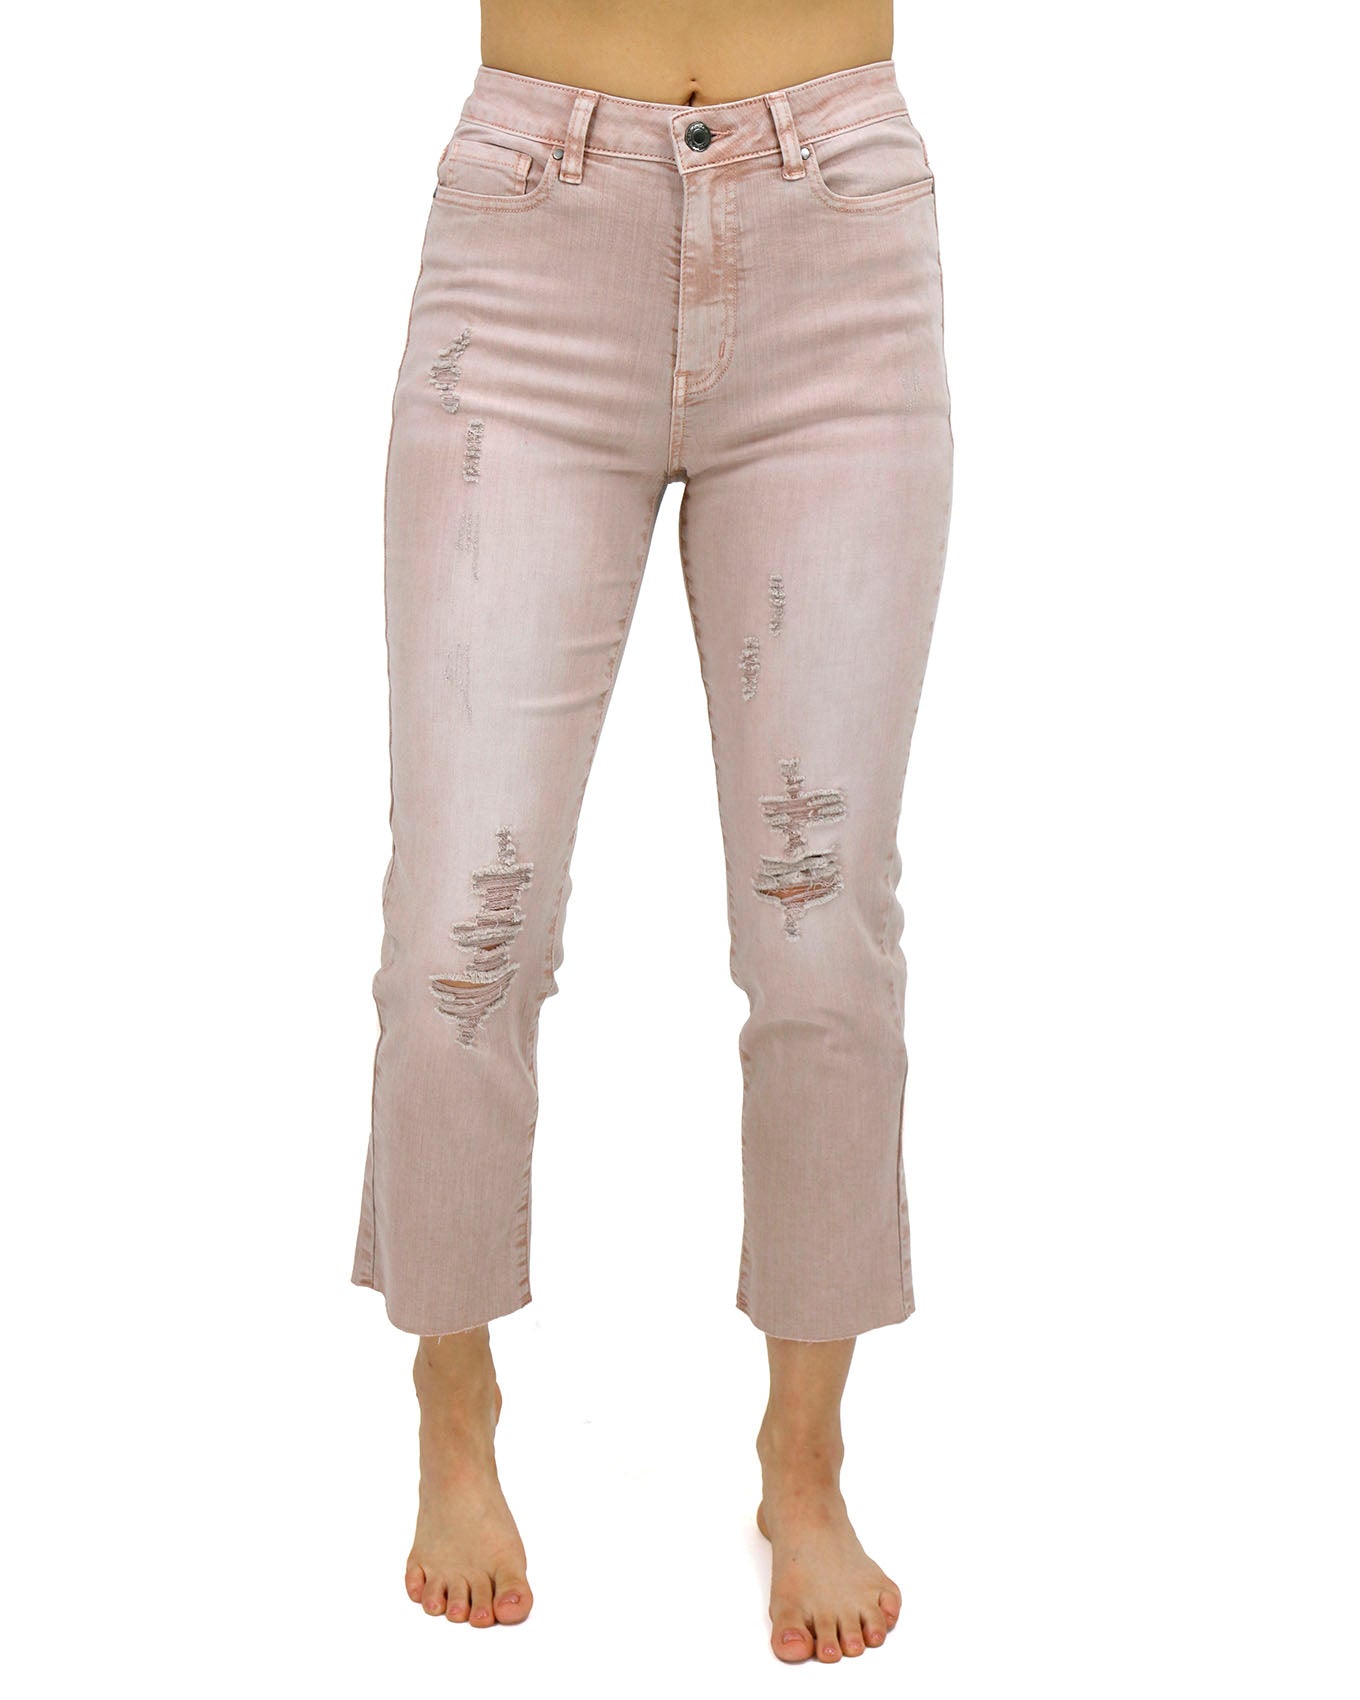 Front stock shot of Blush Mel’s Fave Distressed Cropped Straight Leg Colored Denim